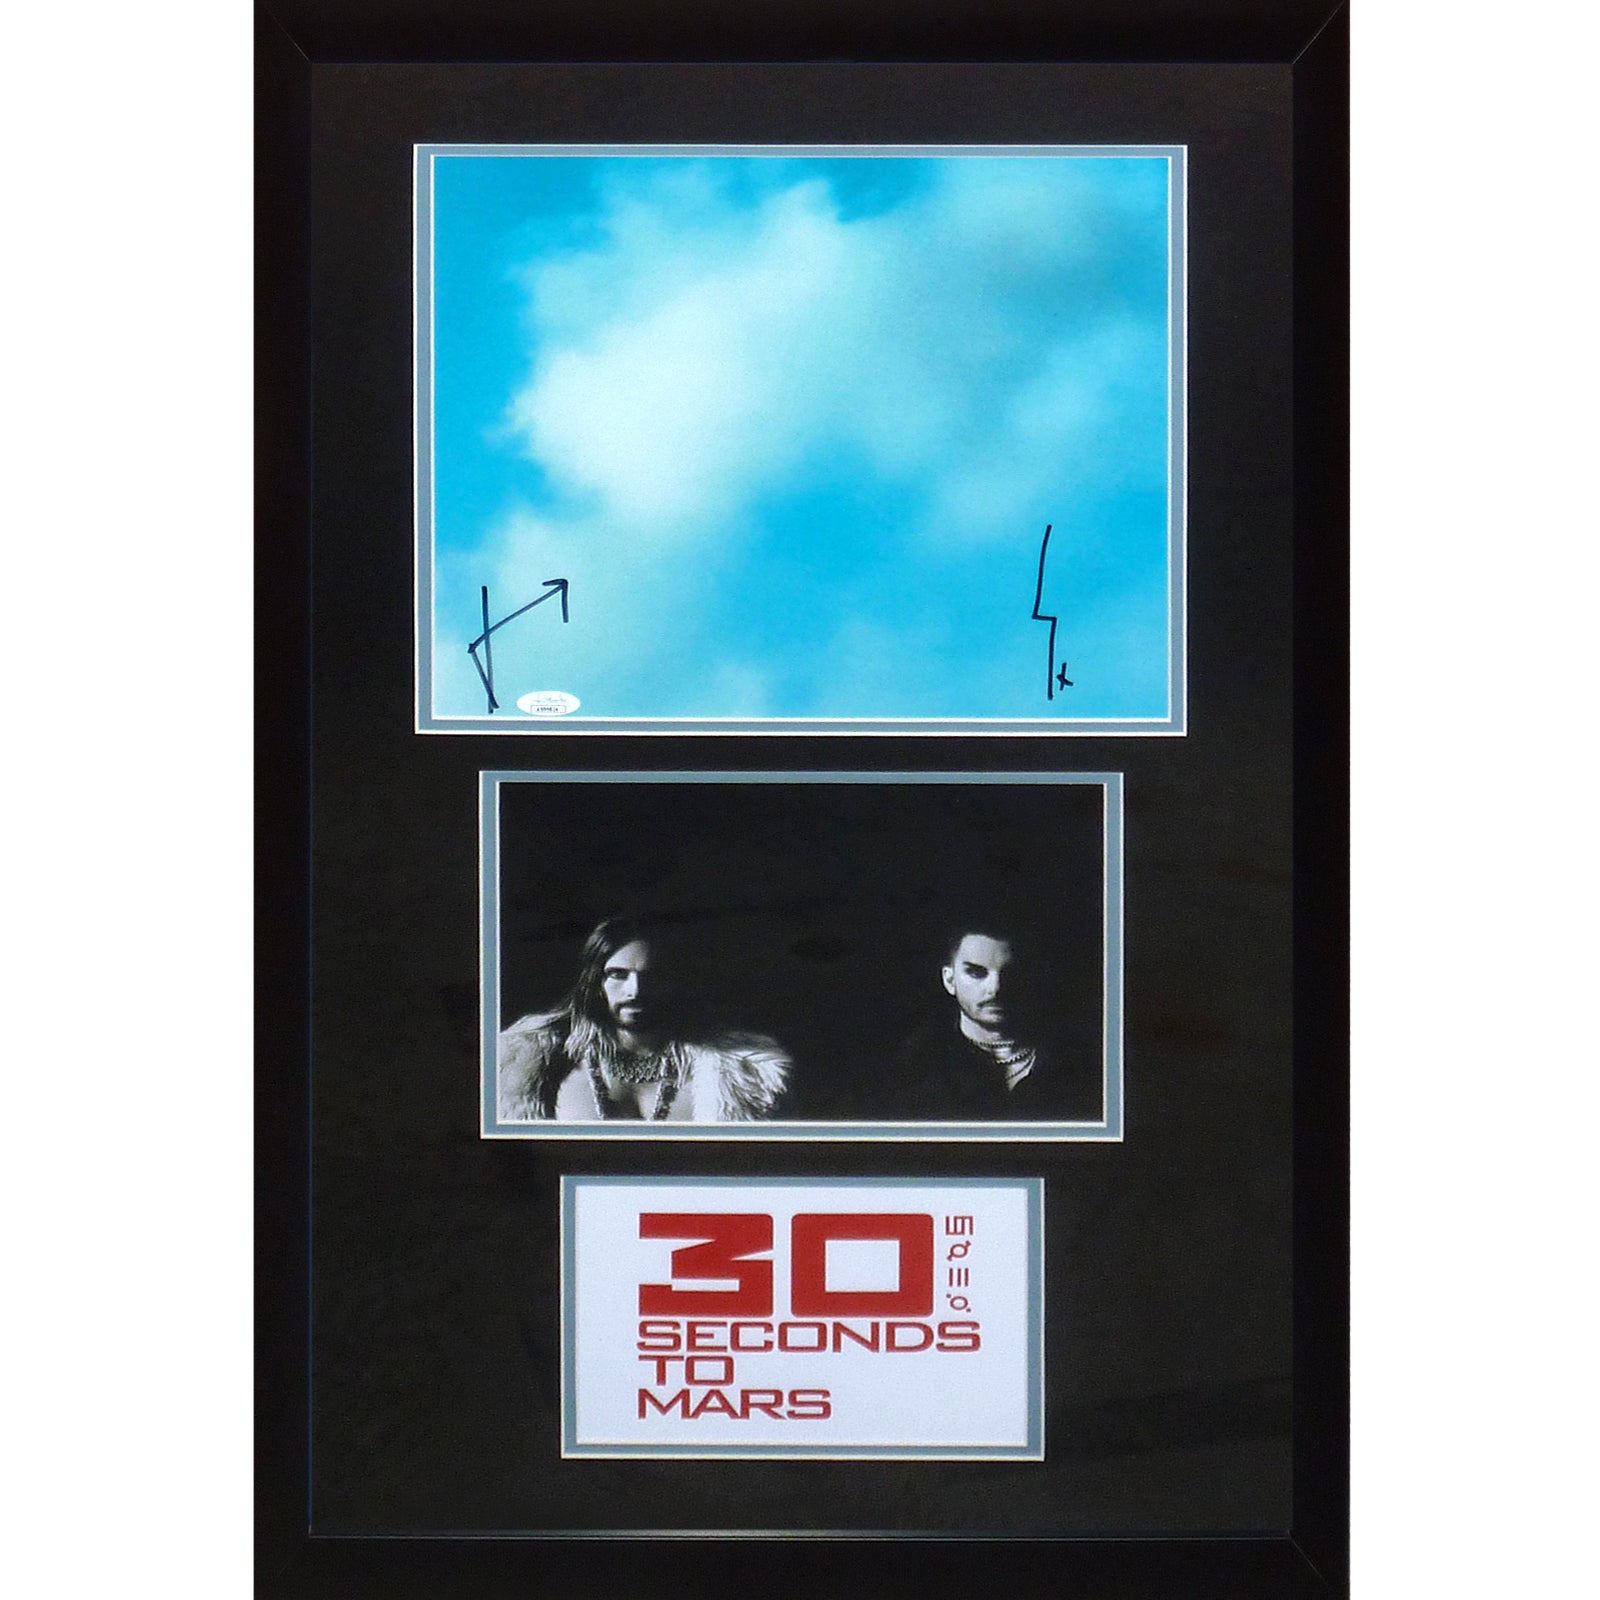 Jared Leto and Shannon Leto Autographed 30 Seconds To Mars Deluxe Framed Album - JSA